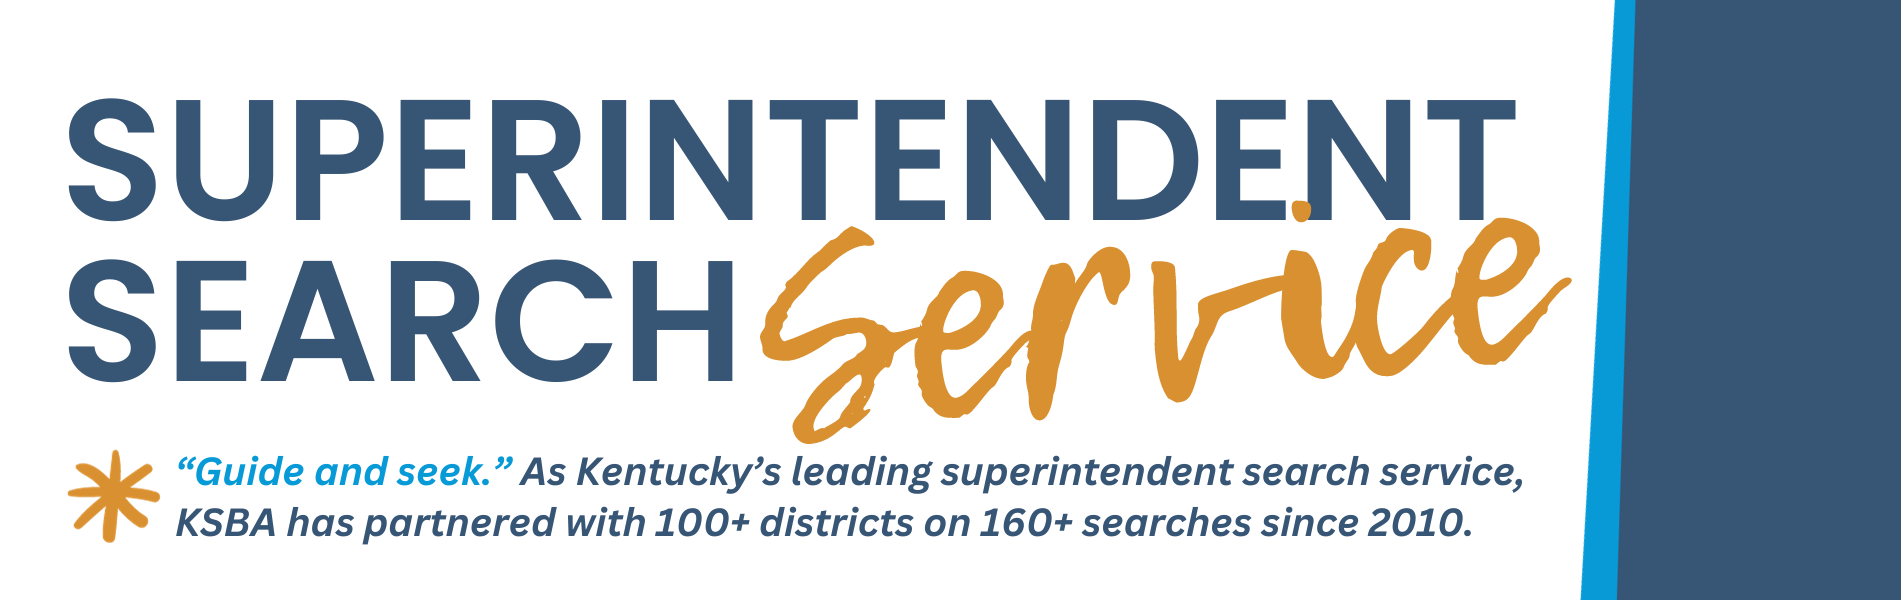 Superintendent search services